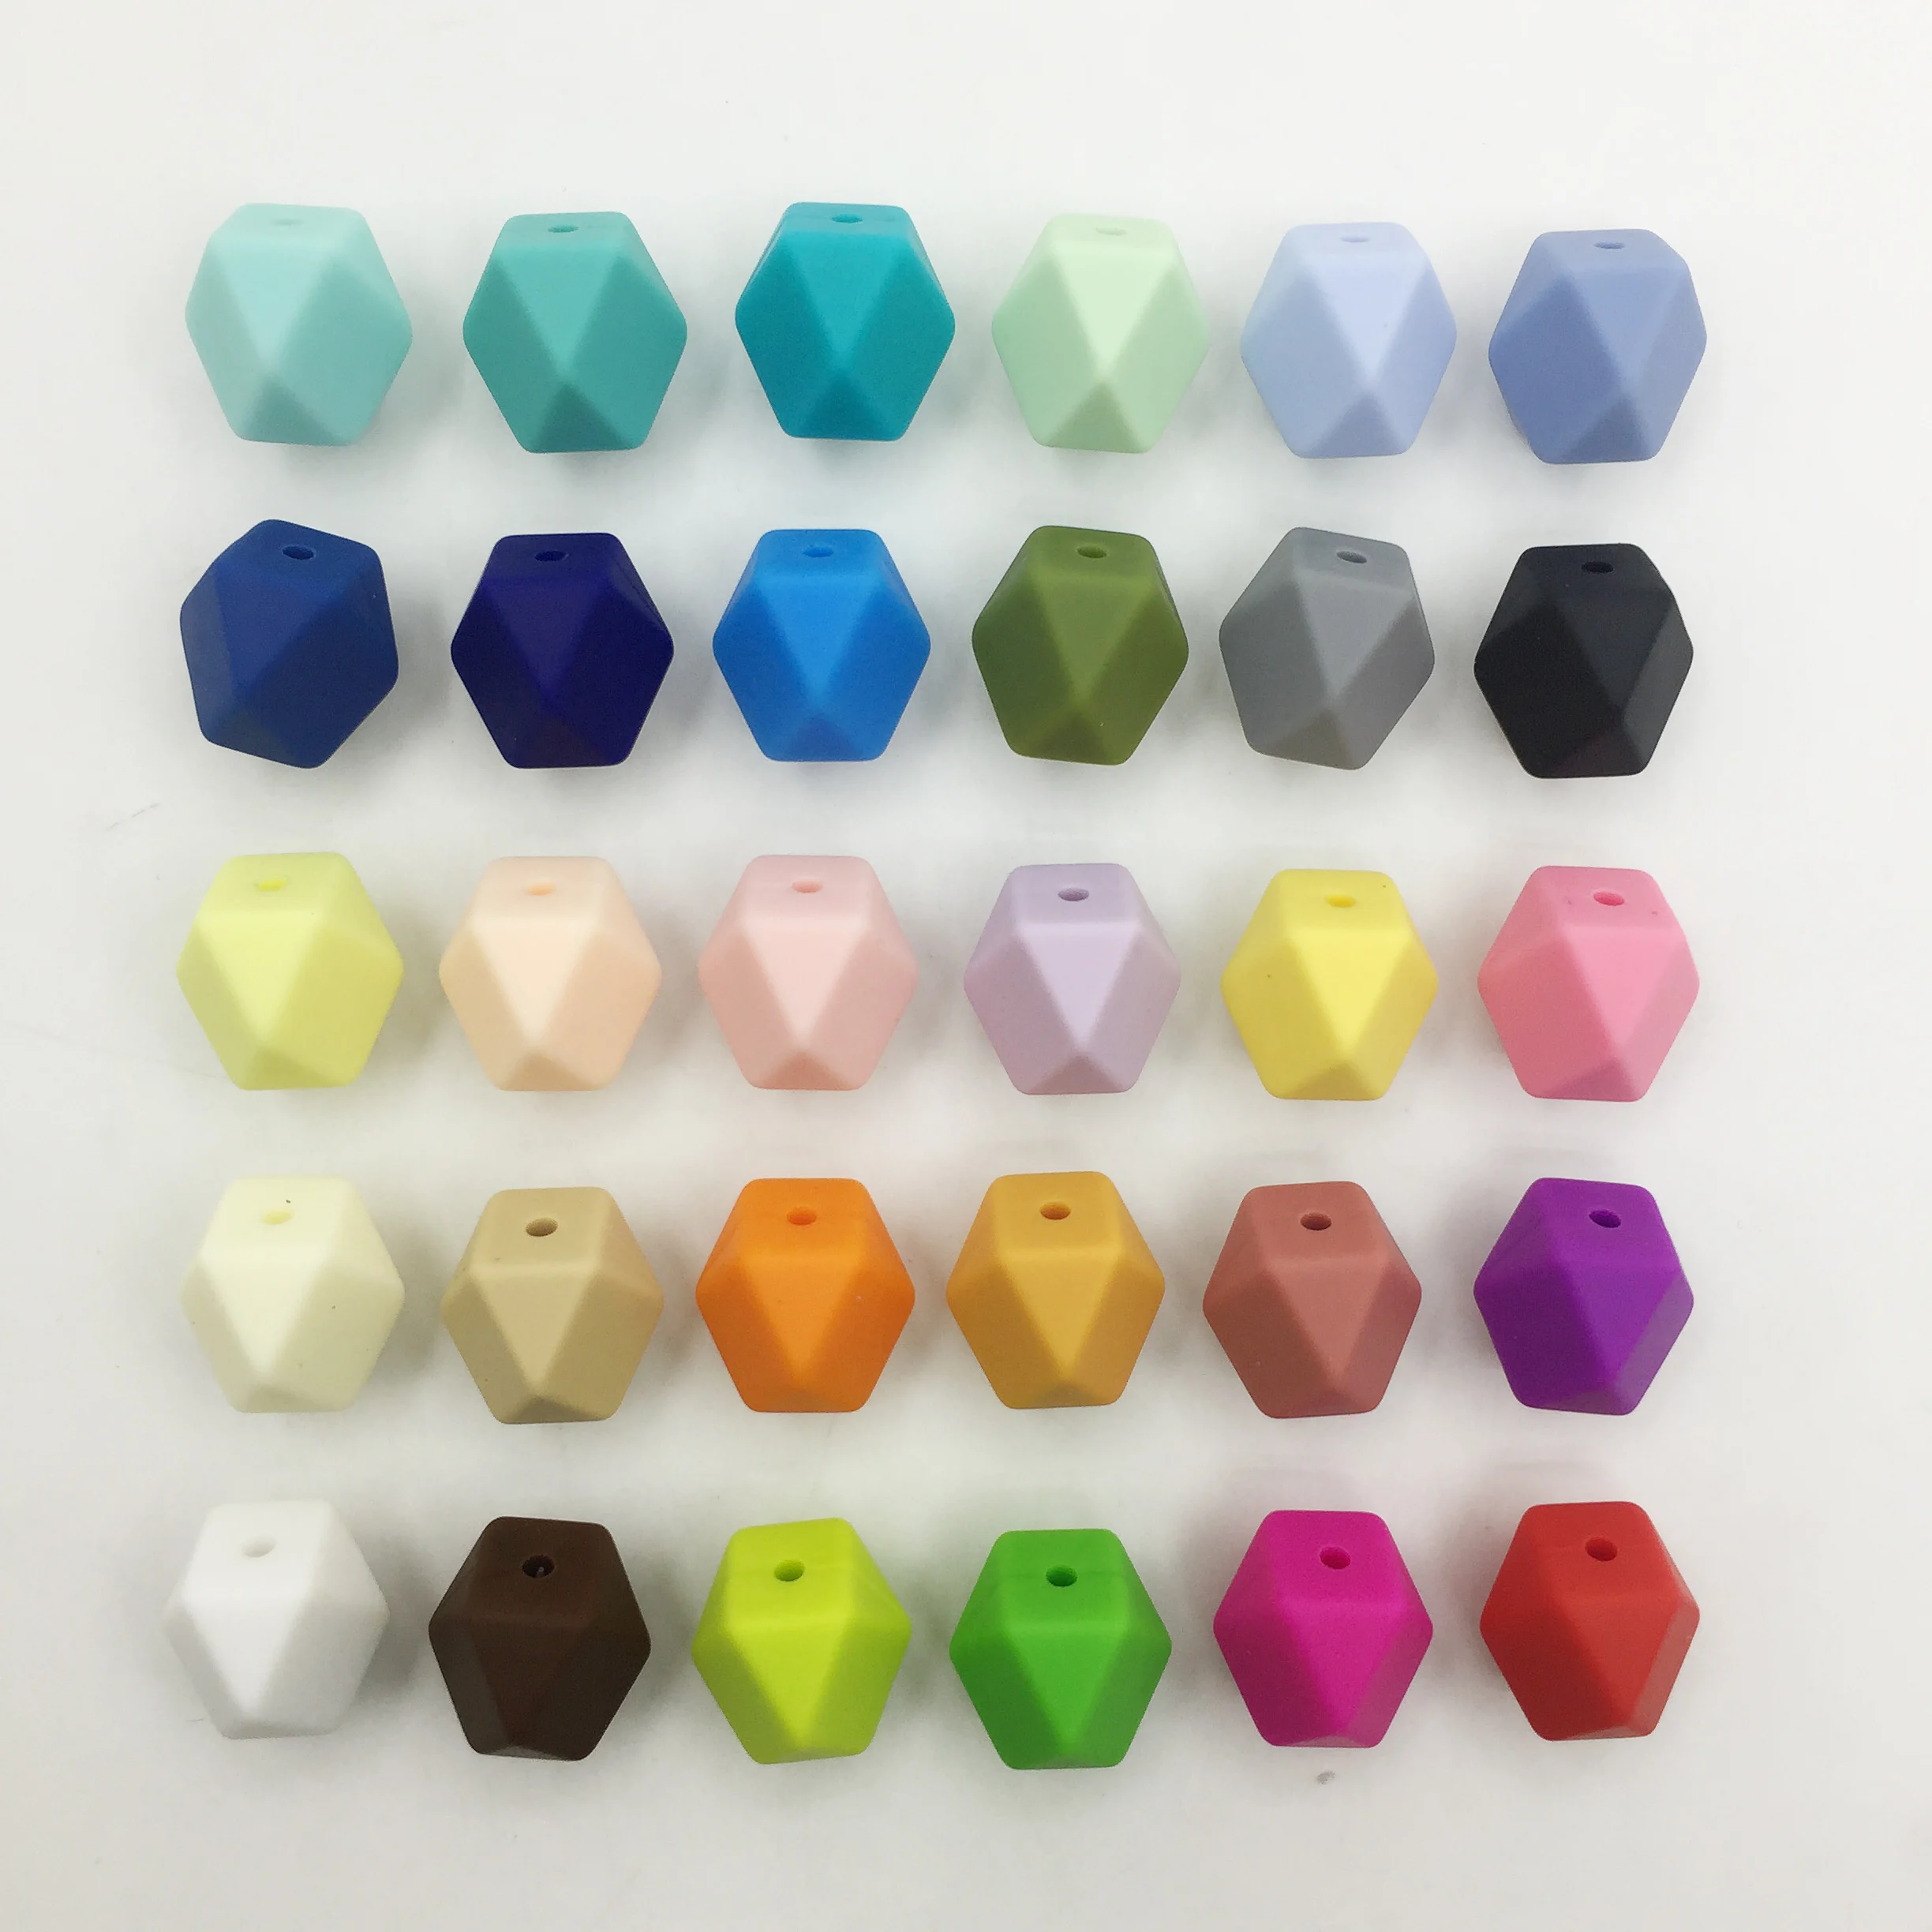 

Wholesale Bulk Large Hexagon Baby Chomp Chew BPA Free Food Grade Soft Loose Silicone Teething Beads For Jewelry Making, 30 colors